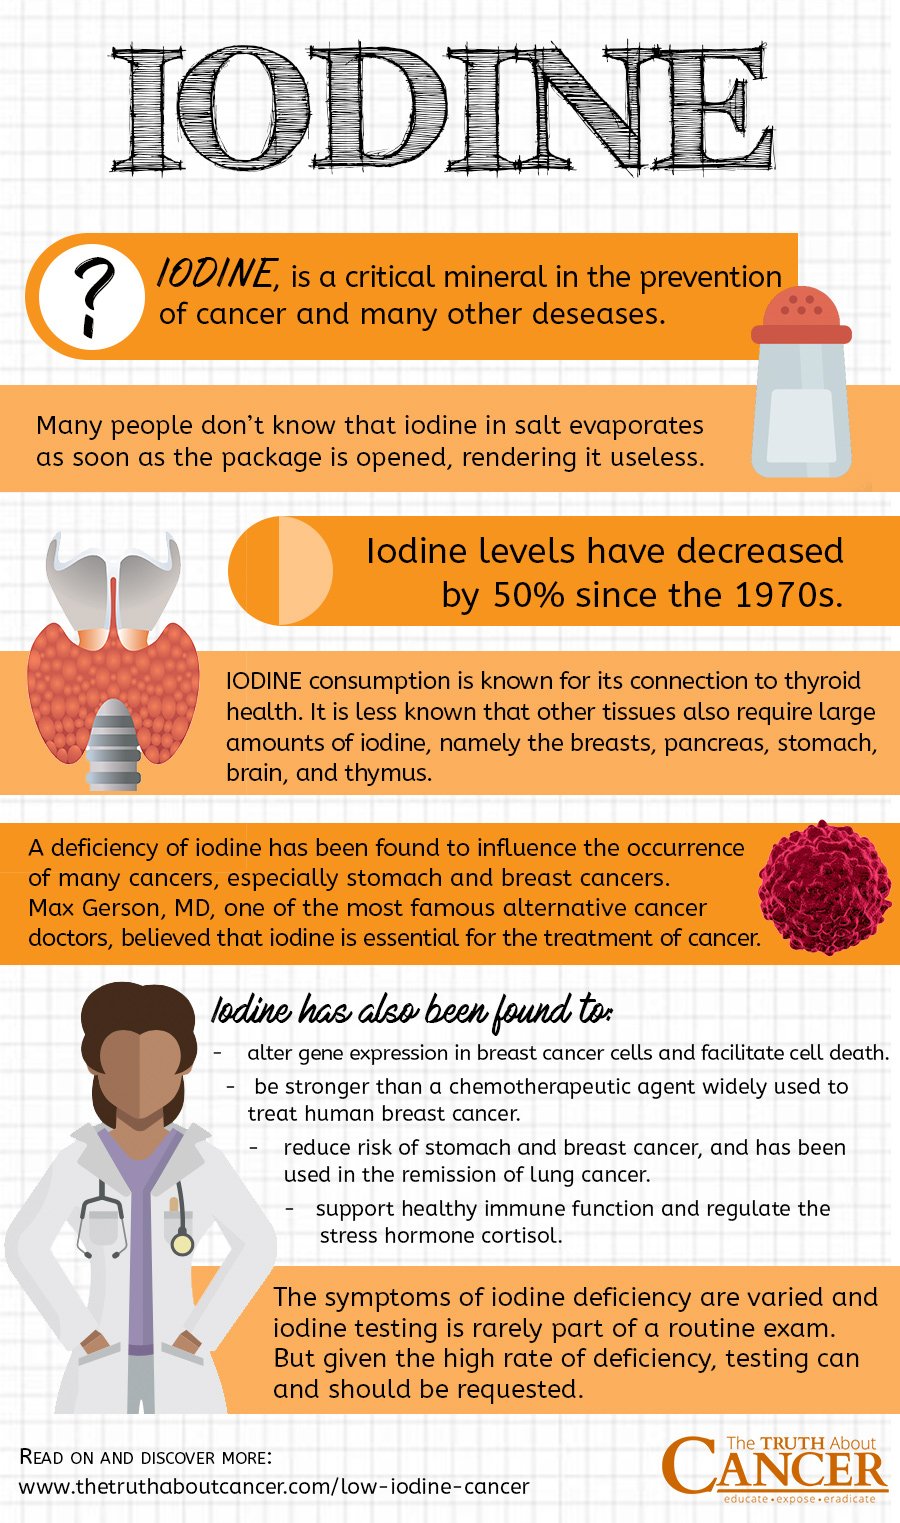 Do You Have Low Iodine?: The Link Between Iodine ...